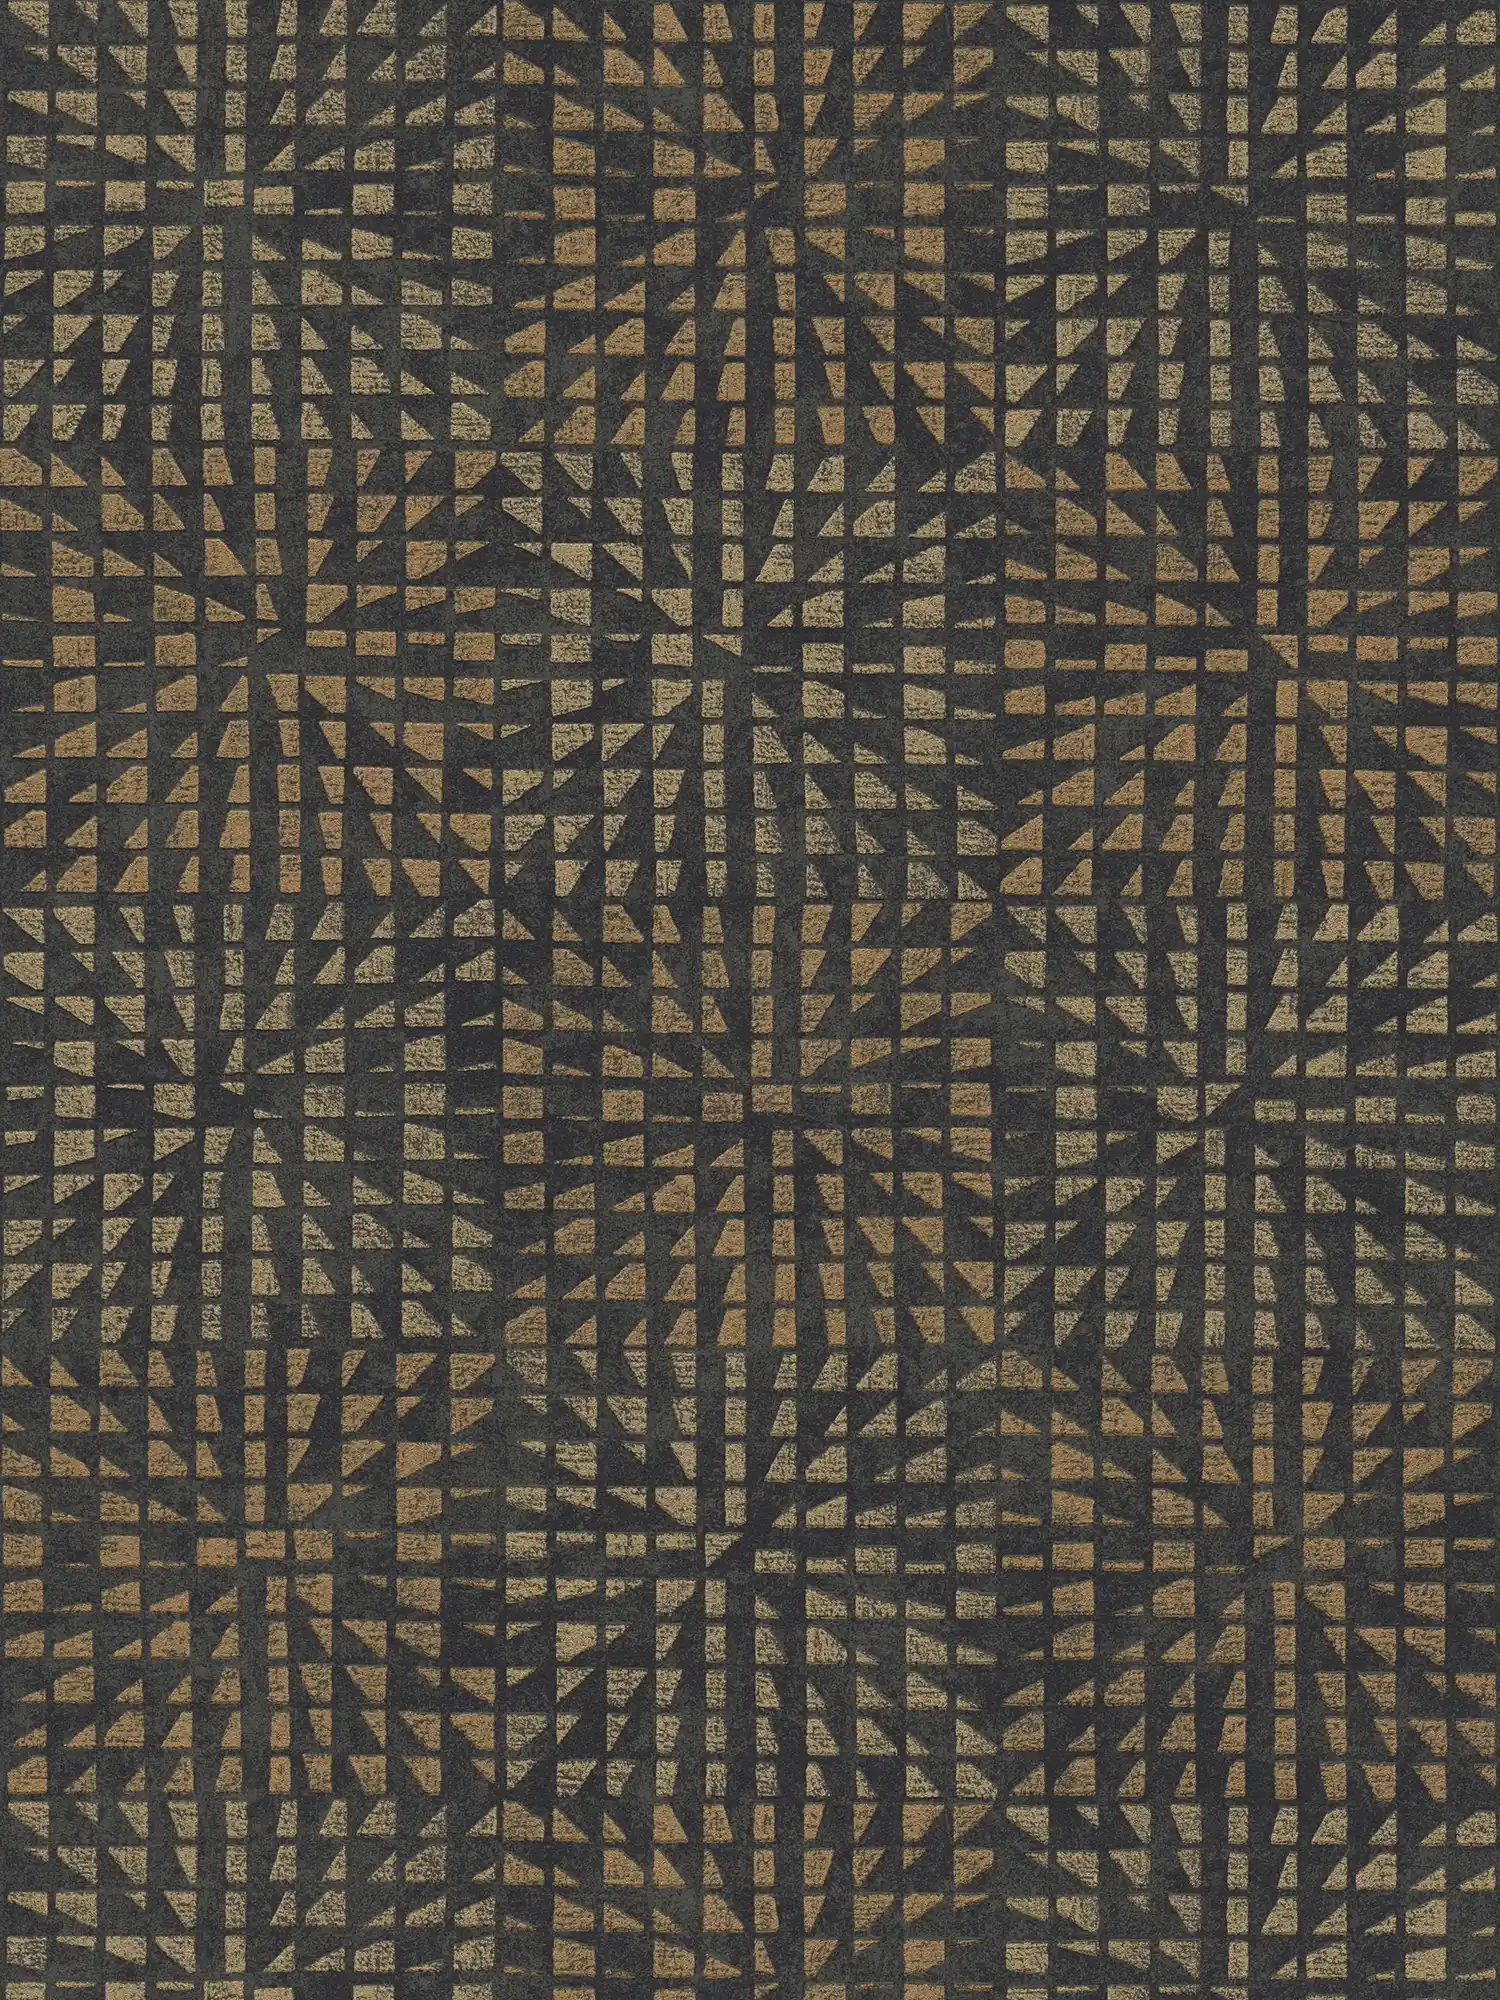 Ethno wallpaper with textured pattern & mosaic effect - black
